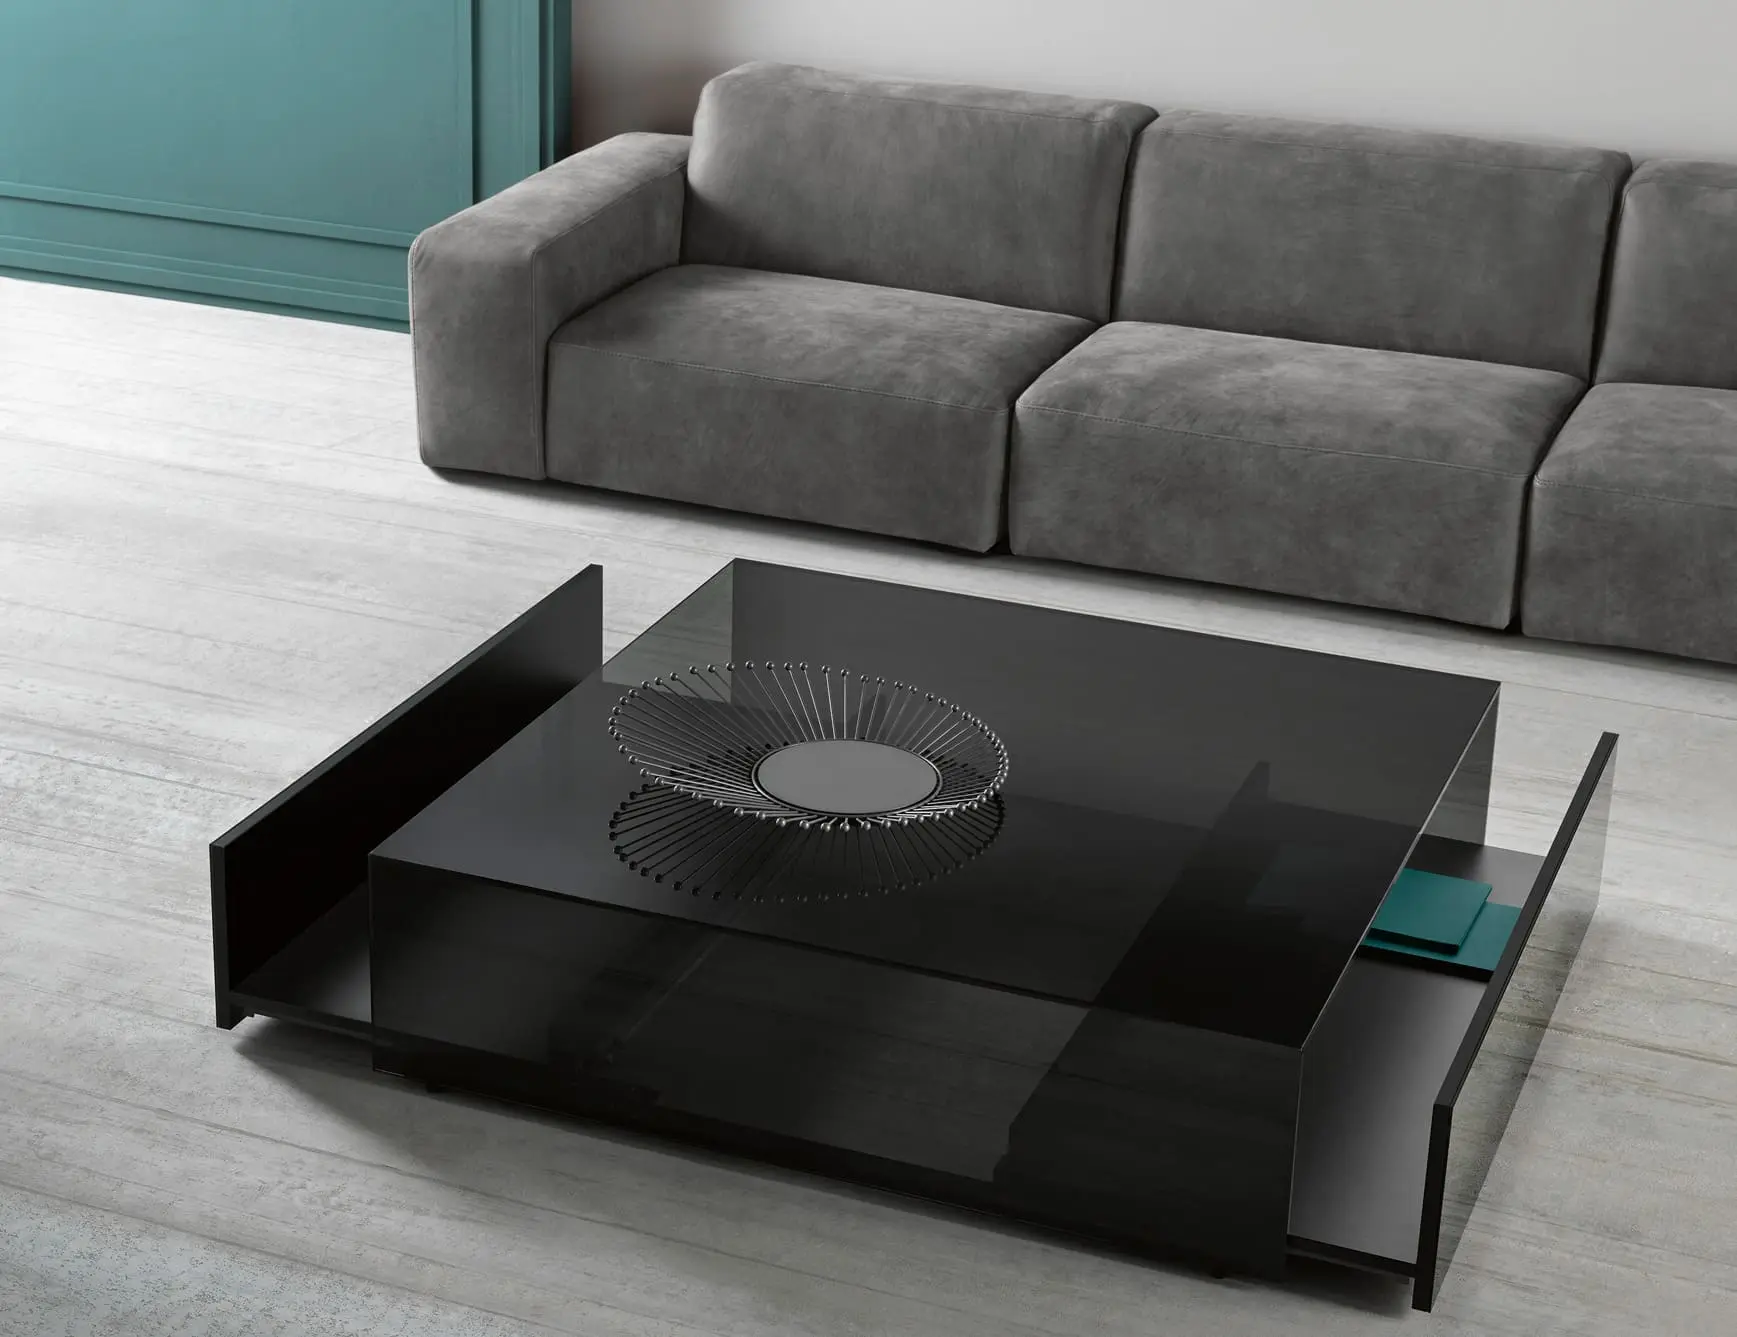 black smoked glass coffee table - Is a black coffee table a good idea